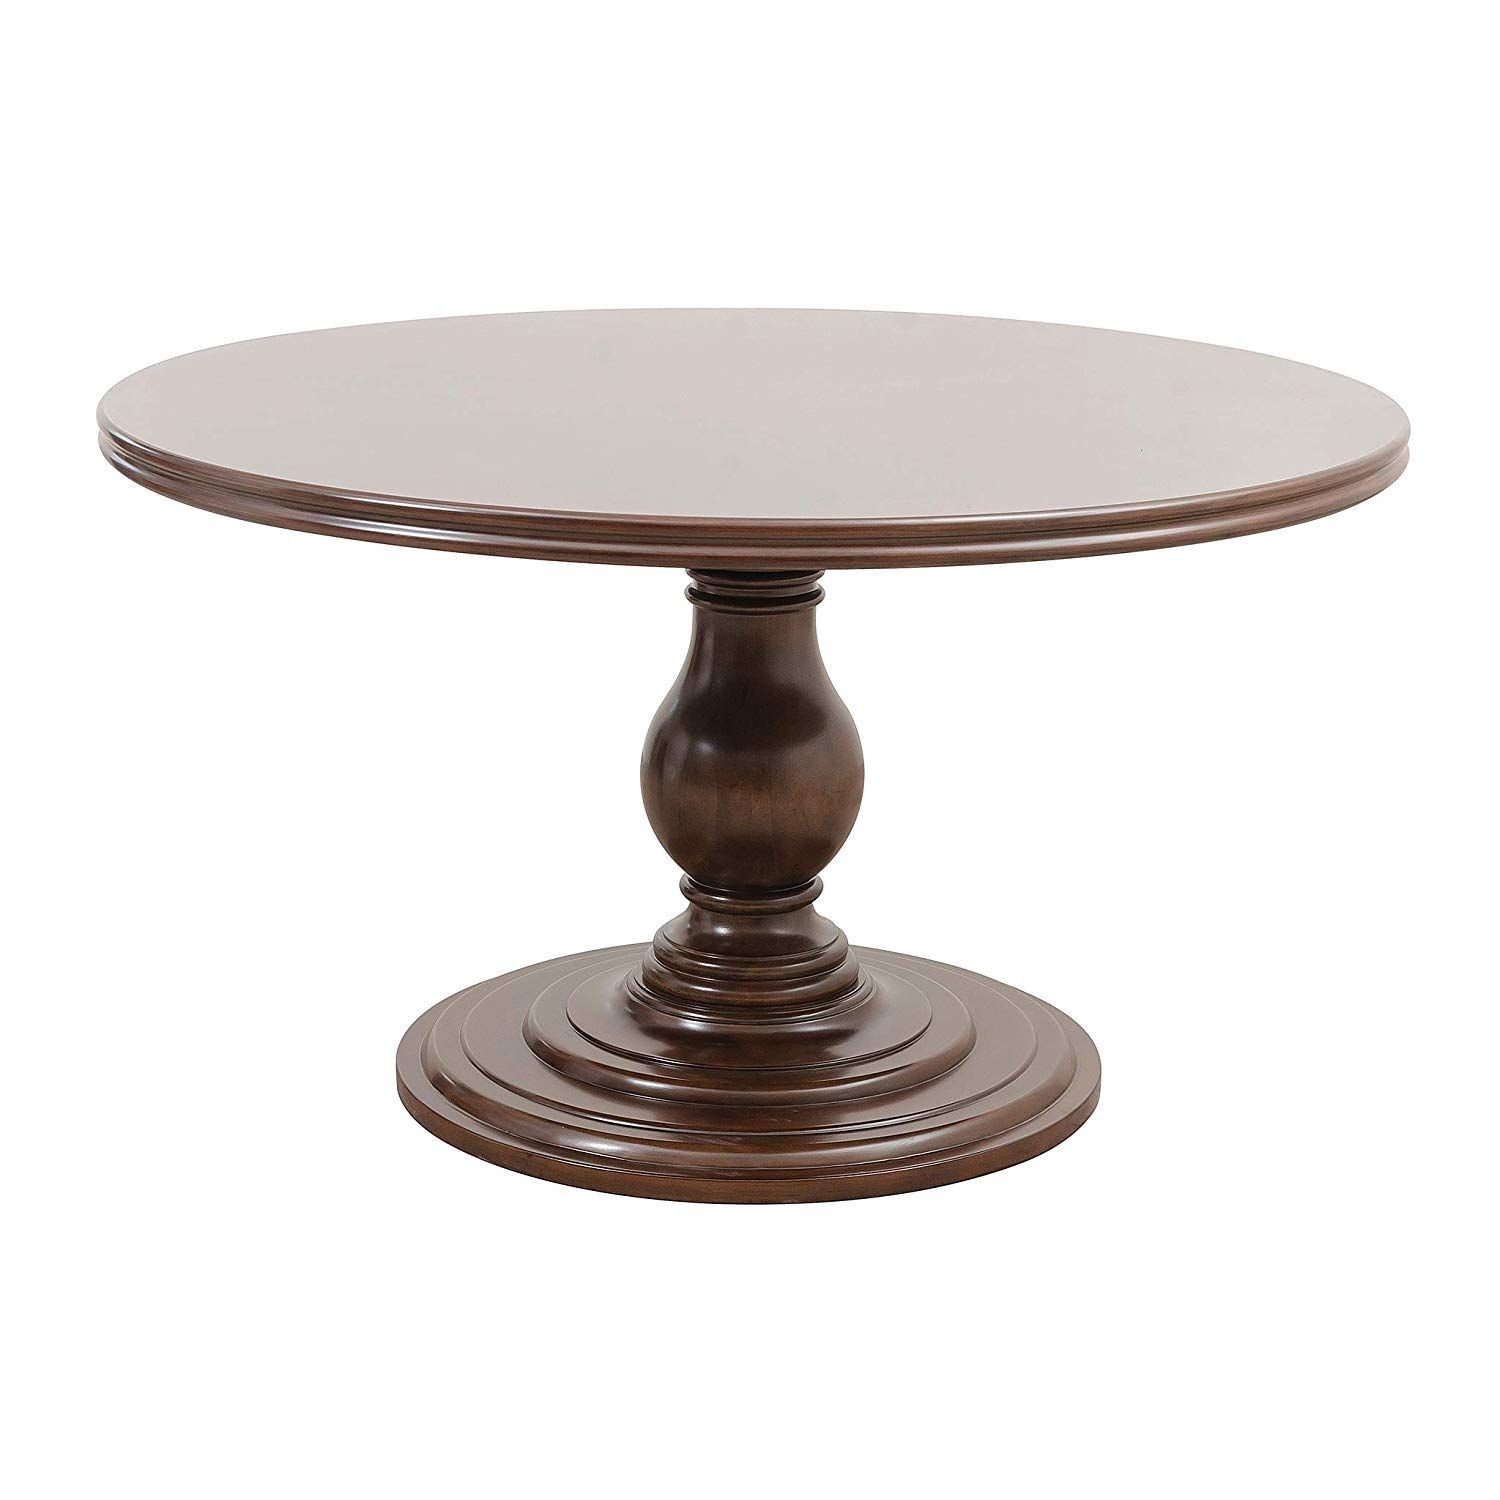 Homelegance Oratorio 54 Round Pedestal Dining Table, Dark In Best And Newest Aztec Round Pedestal Dining Tables (Photo 3 of 25)